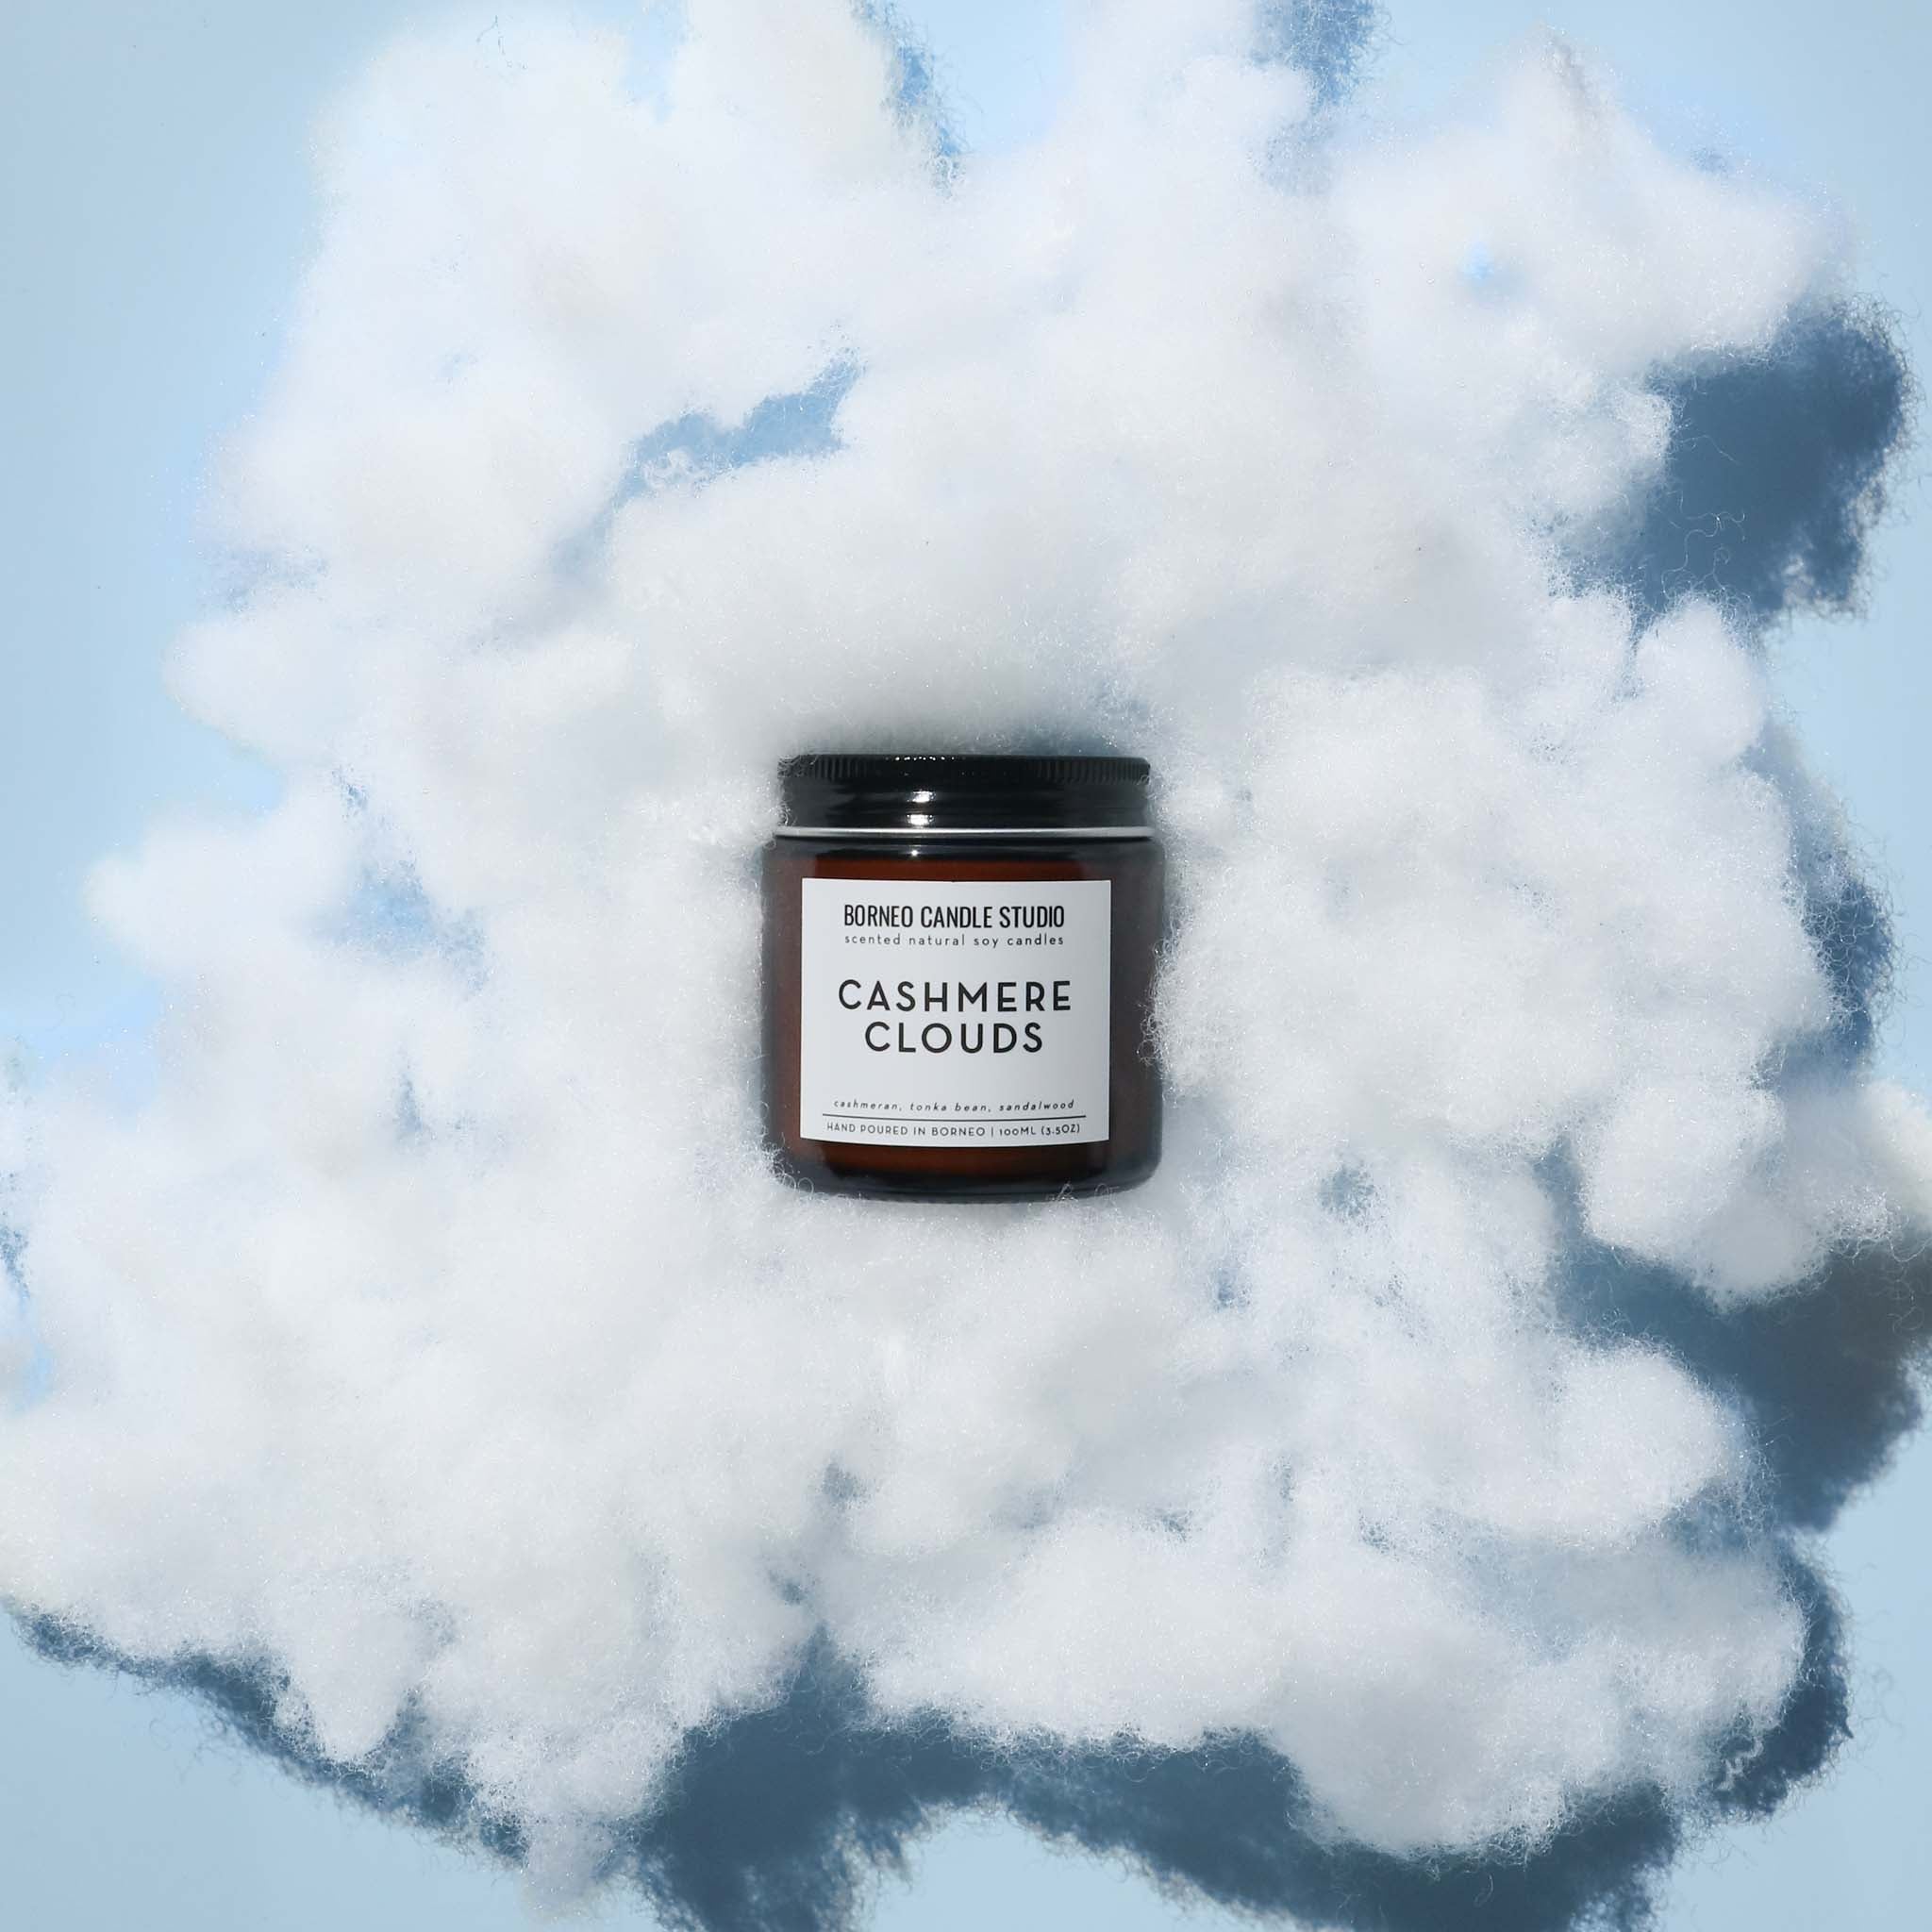 Cashmere Clouds Soy Candle - Borneo Candle Studio